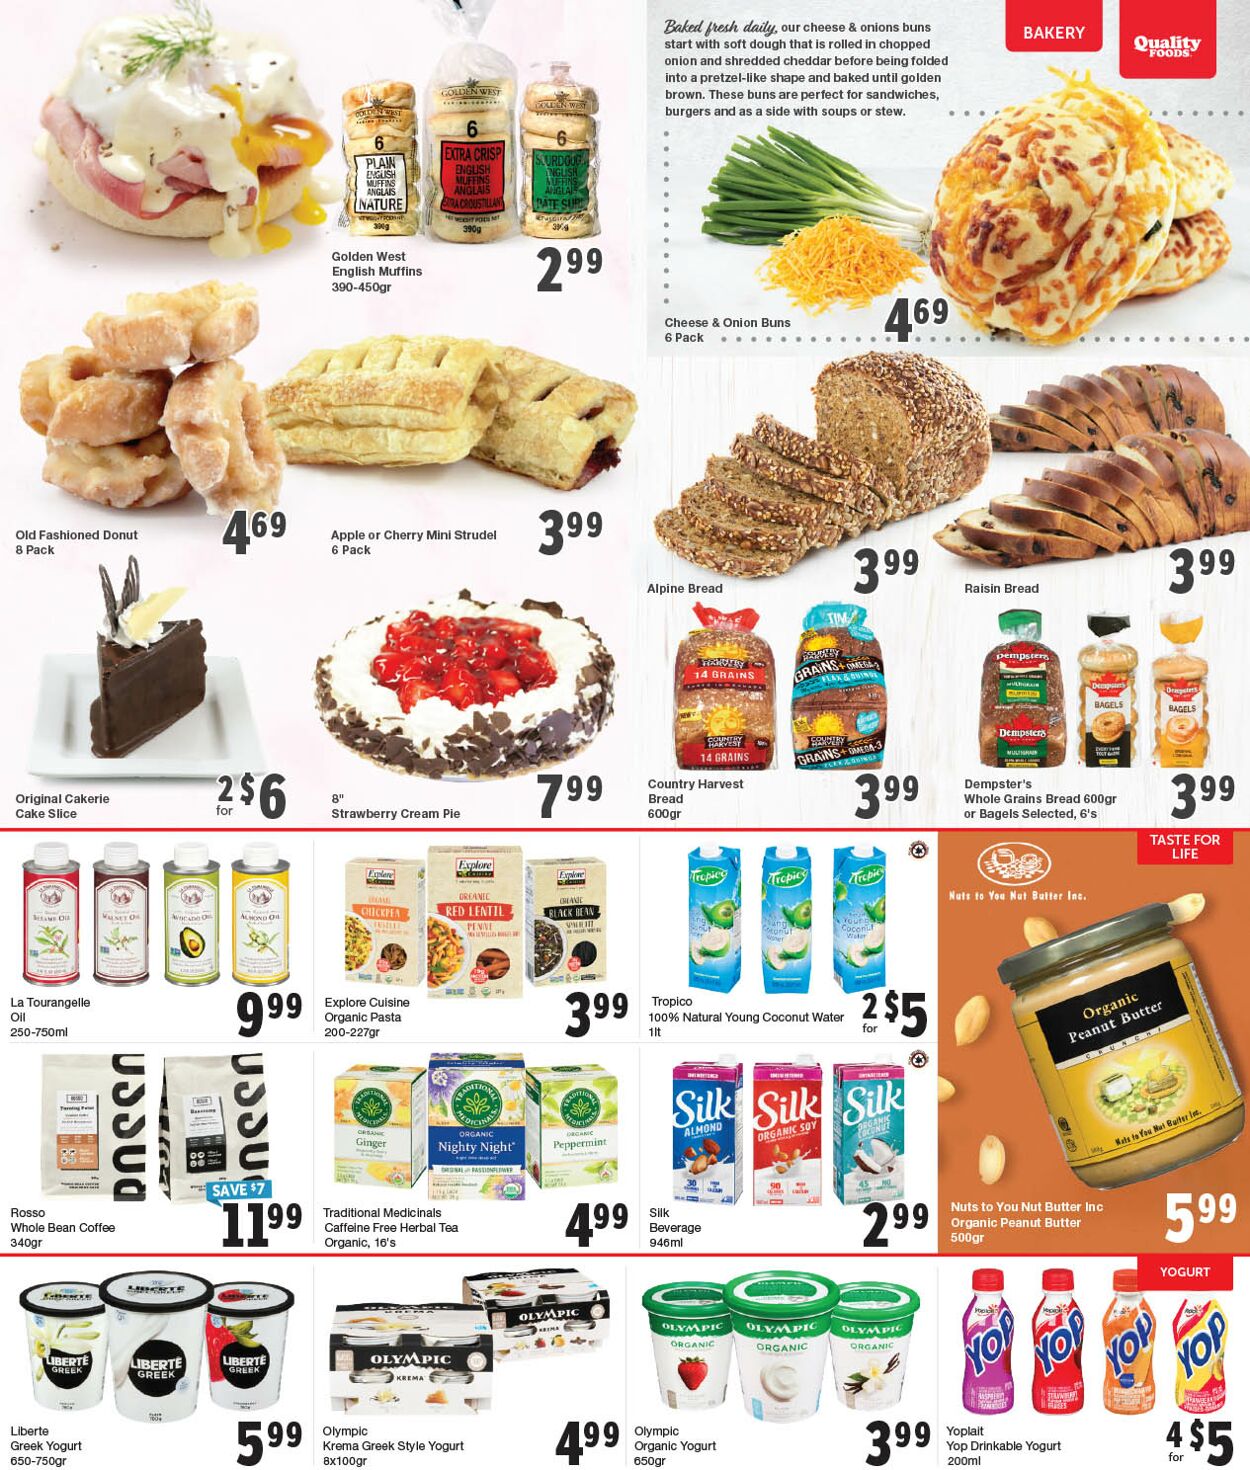 Flyer Quality Foods 06.03.2023 - 12.03.2023